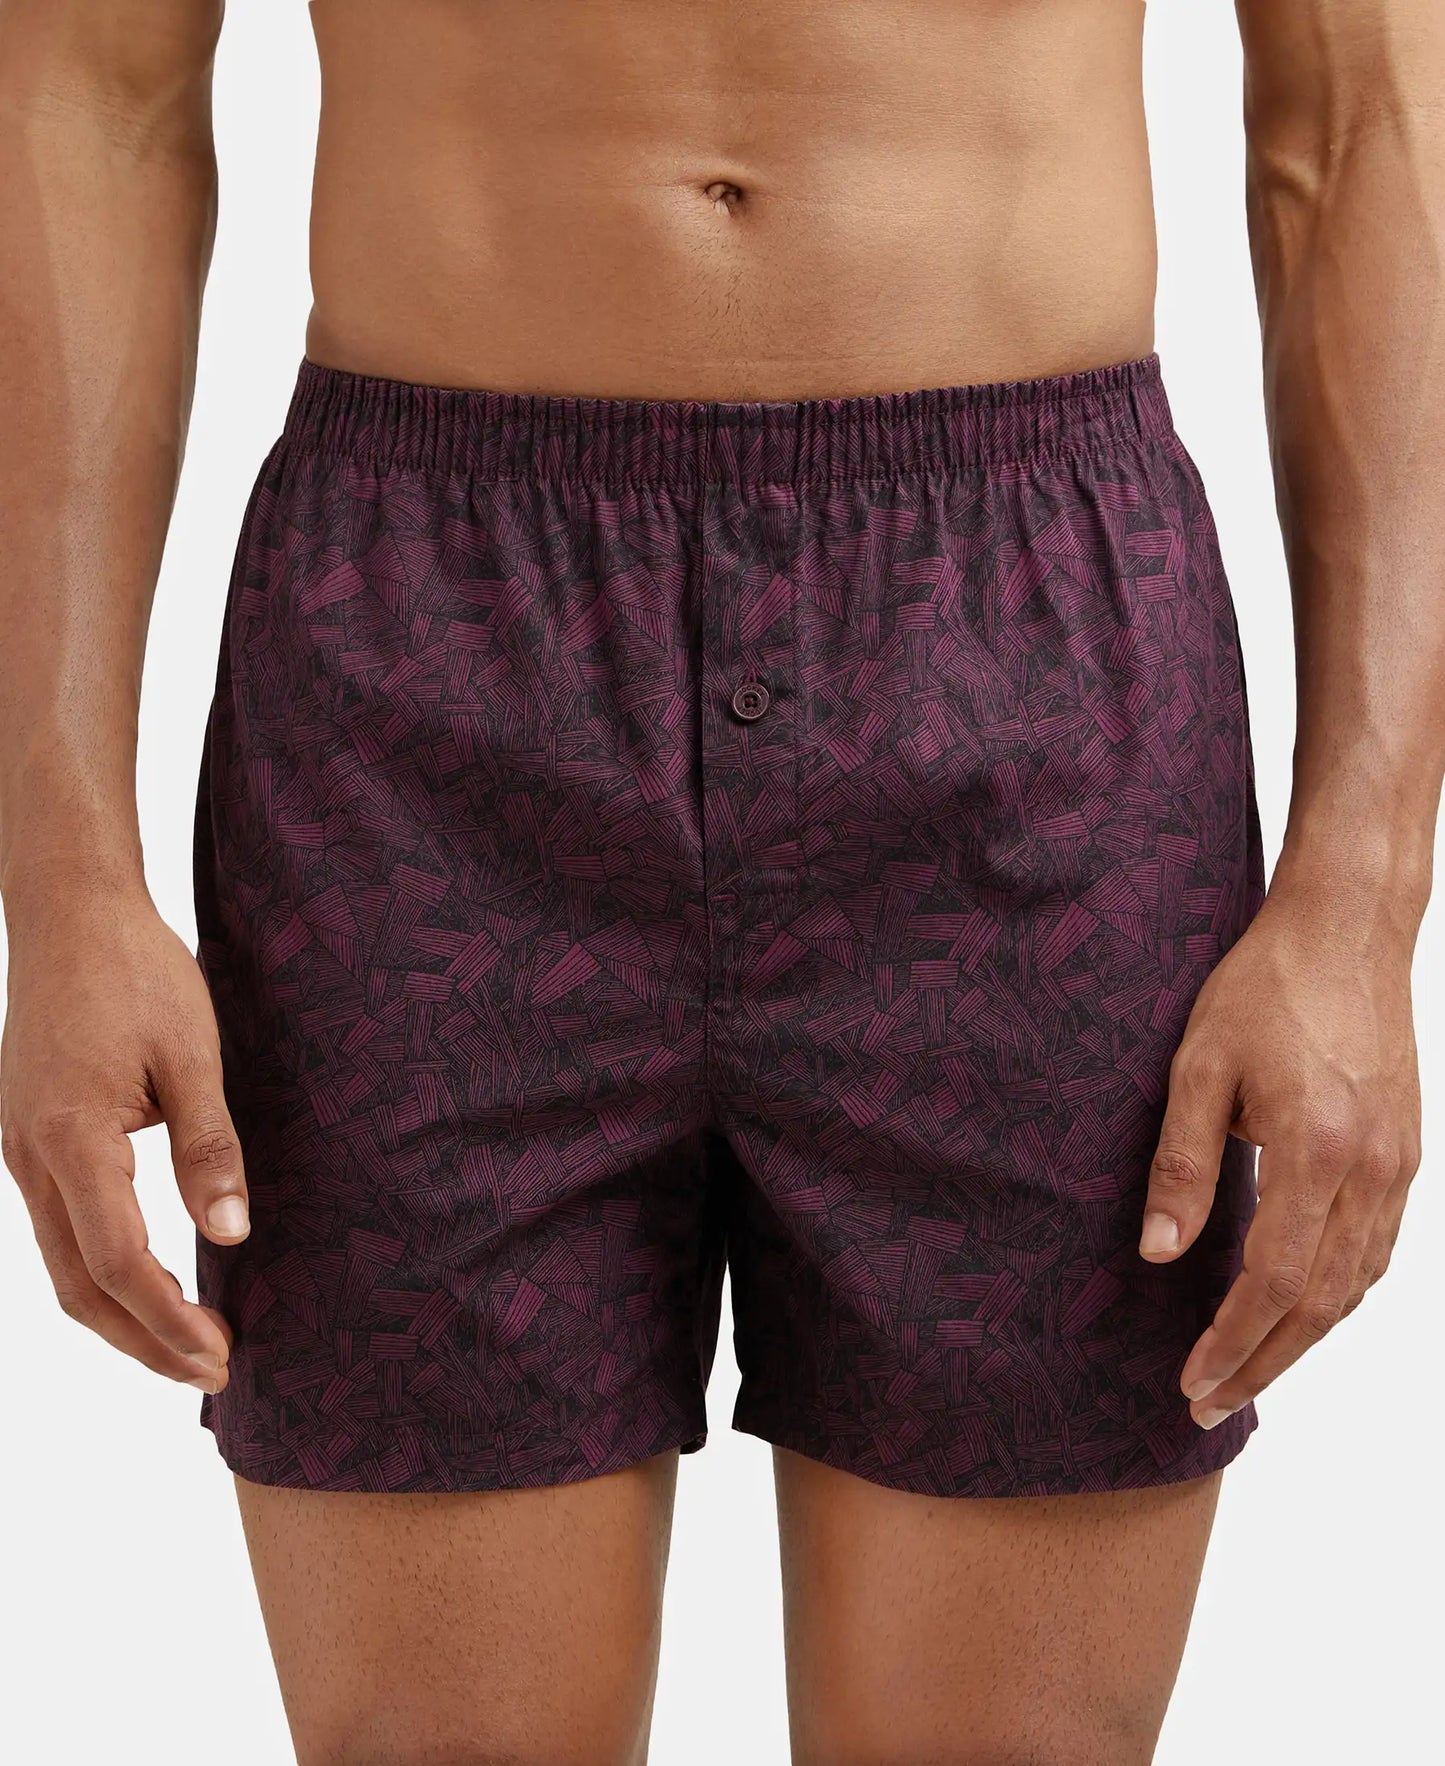 Super Combed Mercerized Cotton Woven Checkered Inner Boxers with Ultrasoft and Durable Inner Waistband - Mauve Wine & Seaport Teal-3